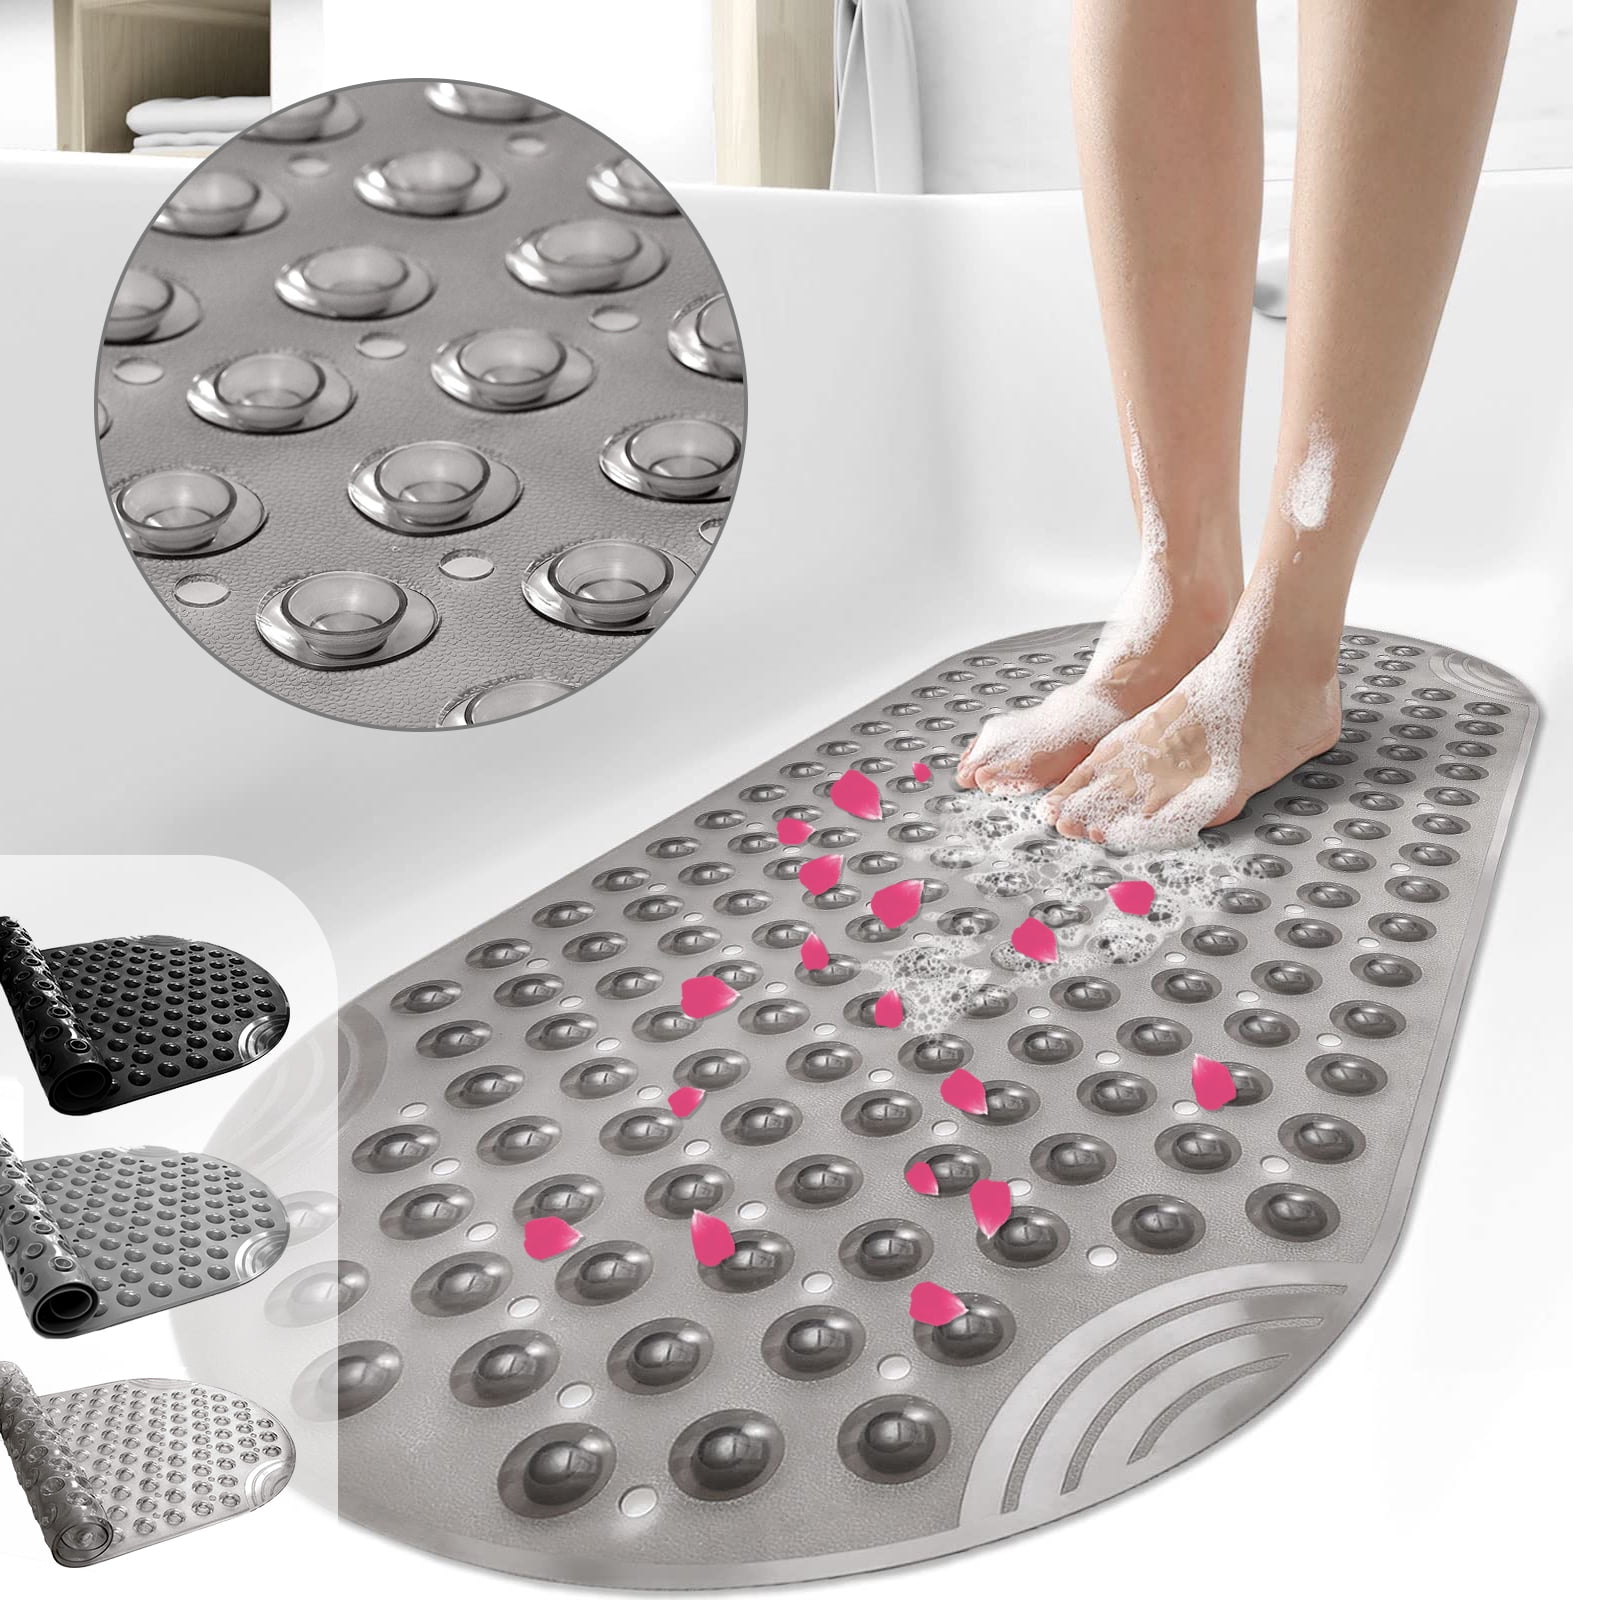 Non-Toxic Secure Shower Mat - Non-Slip Safe - Fast-Drying - 24x32 inch